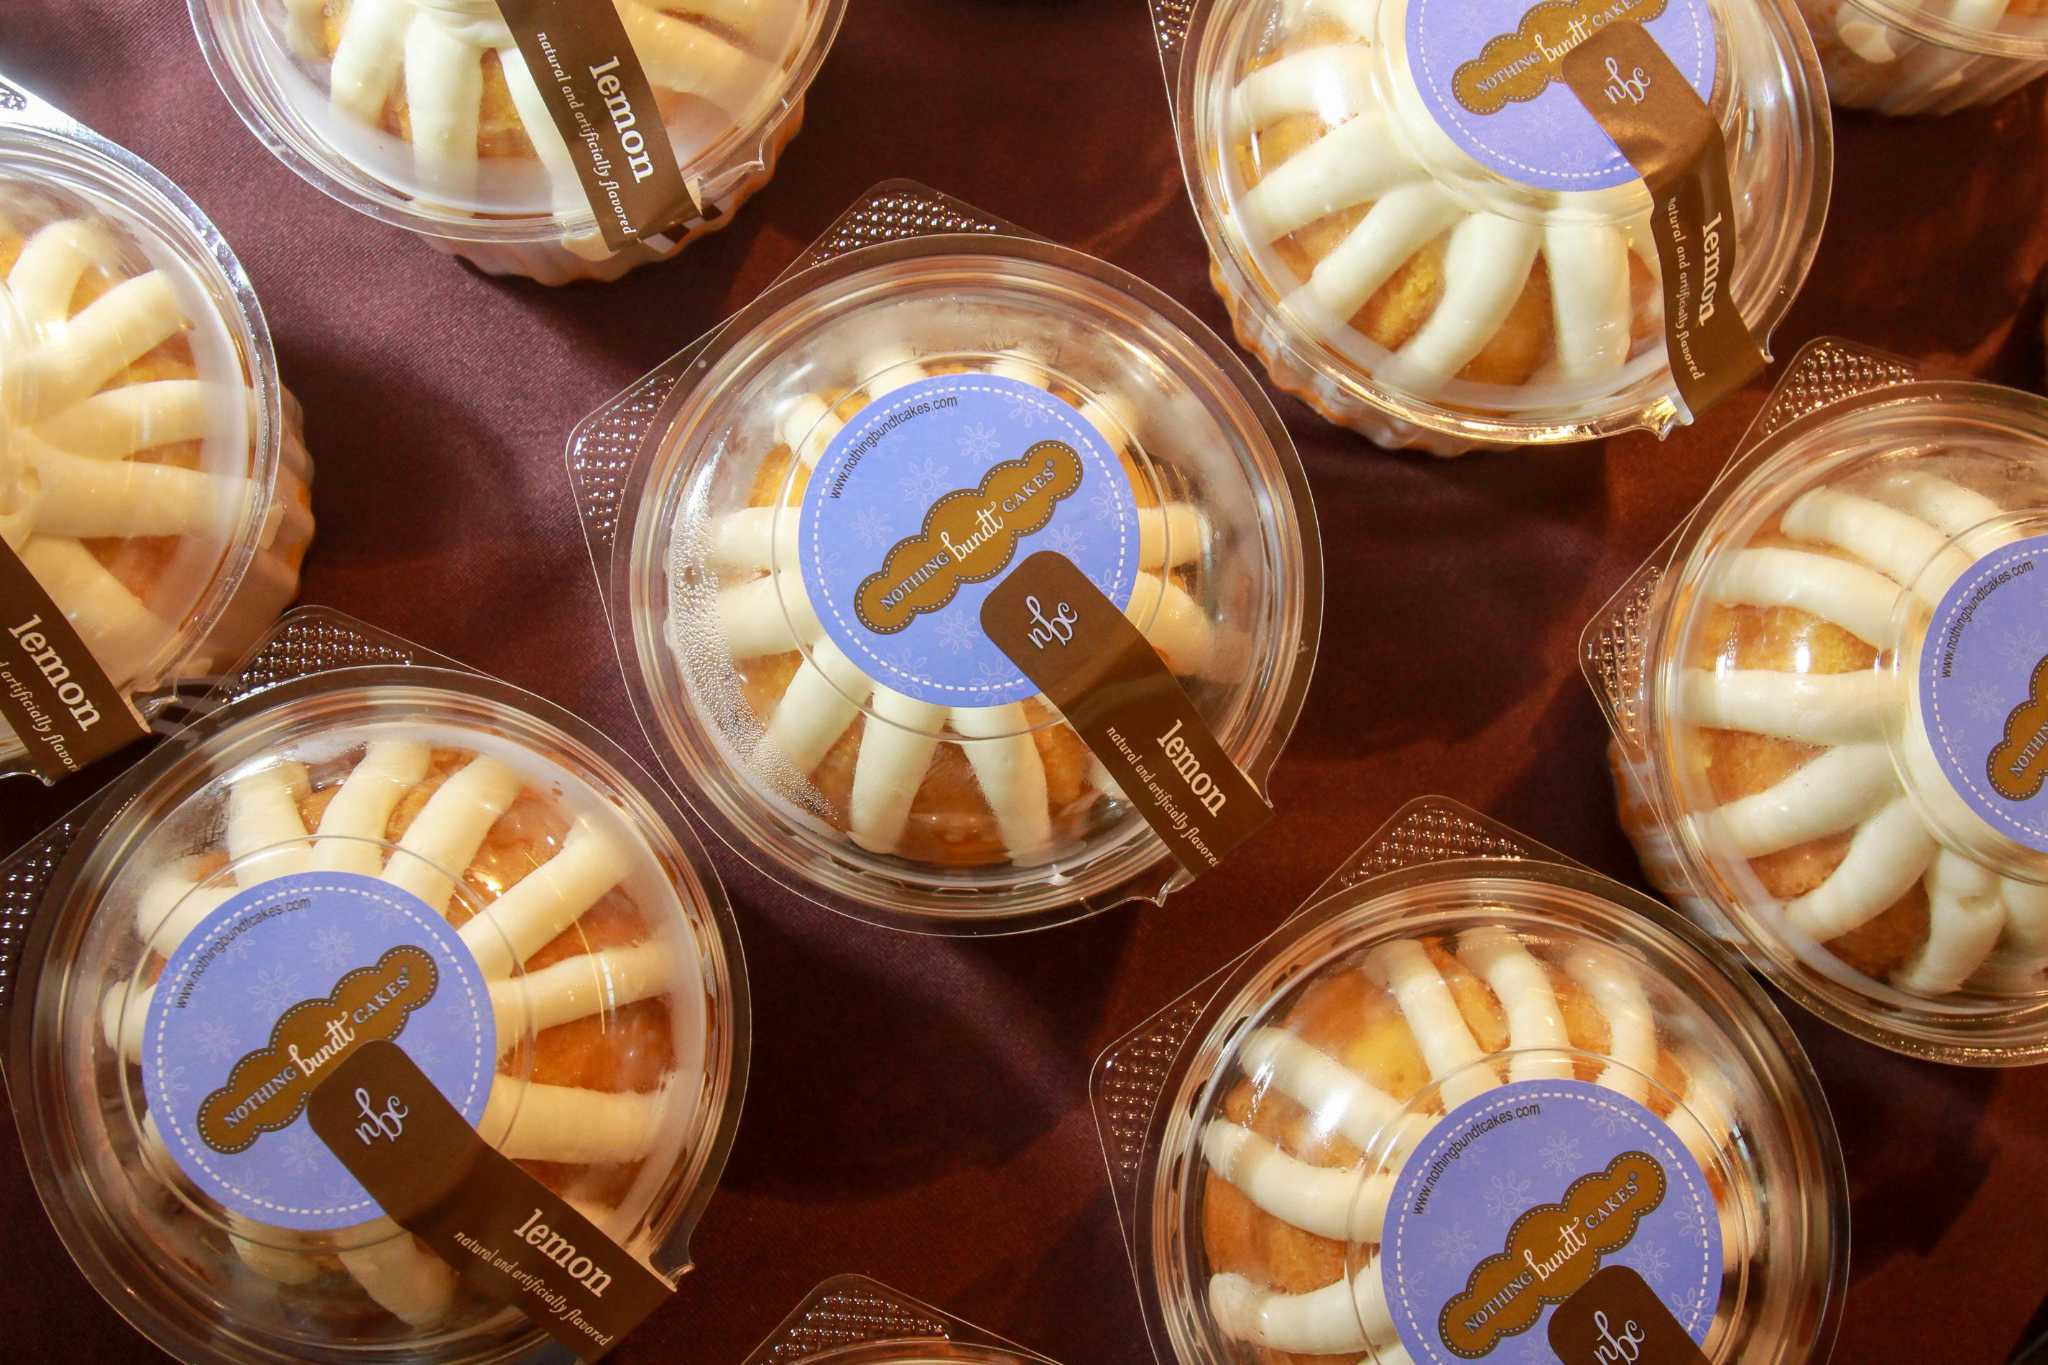 How to score a free cake from Nothing Bundt Cakes